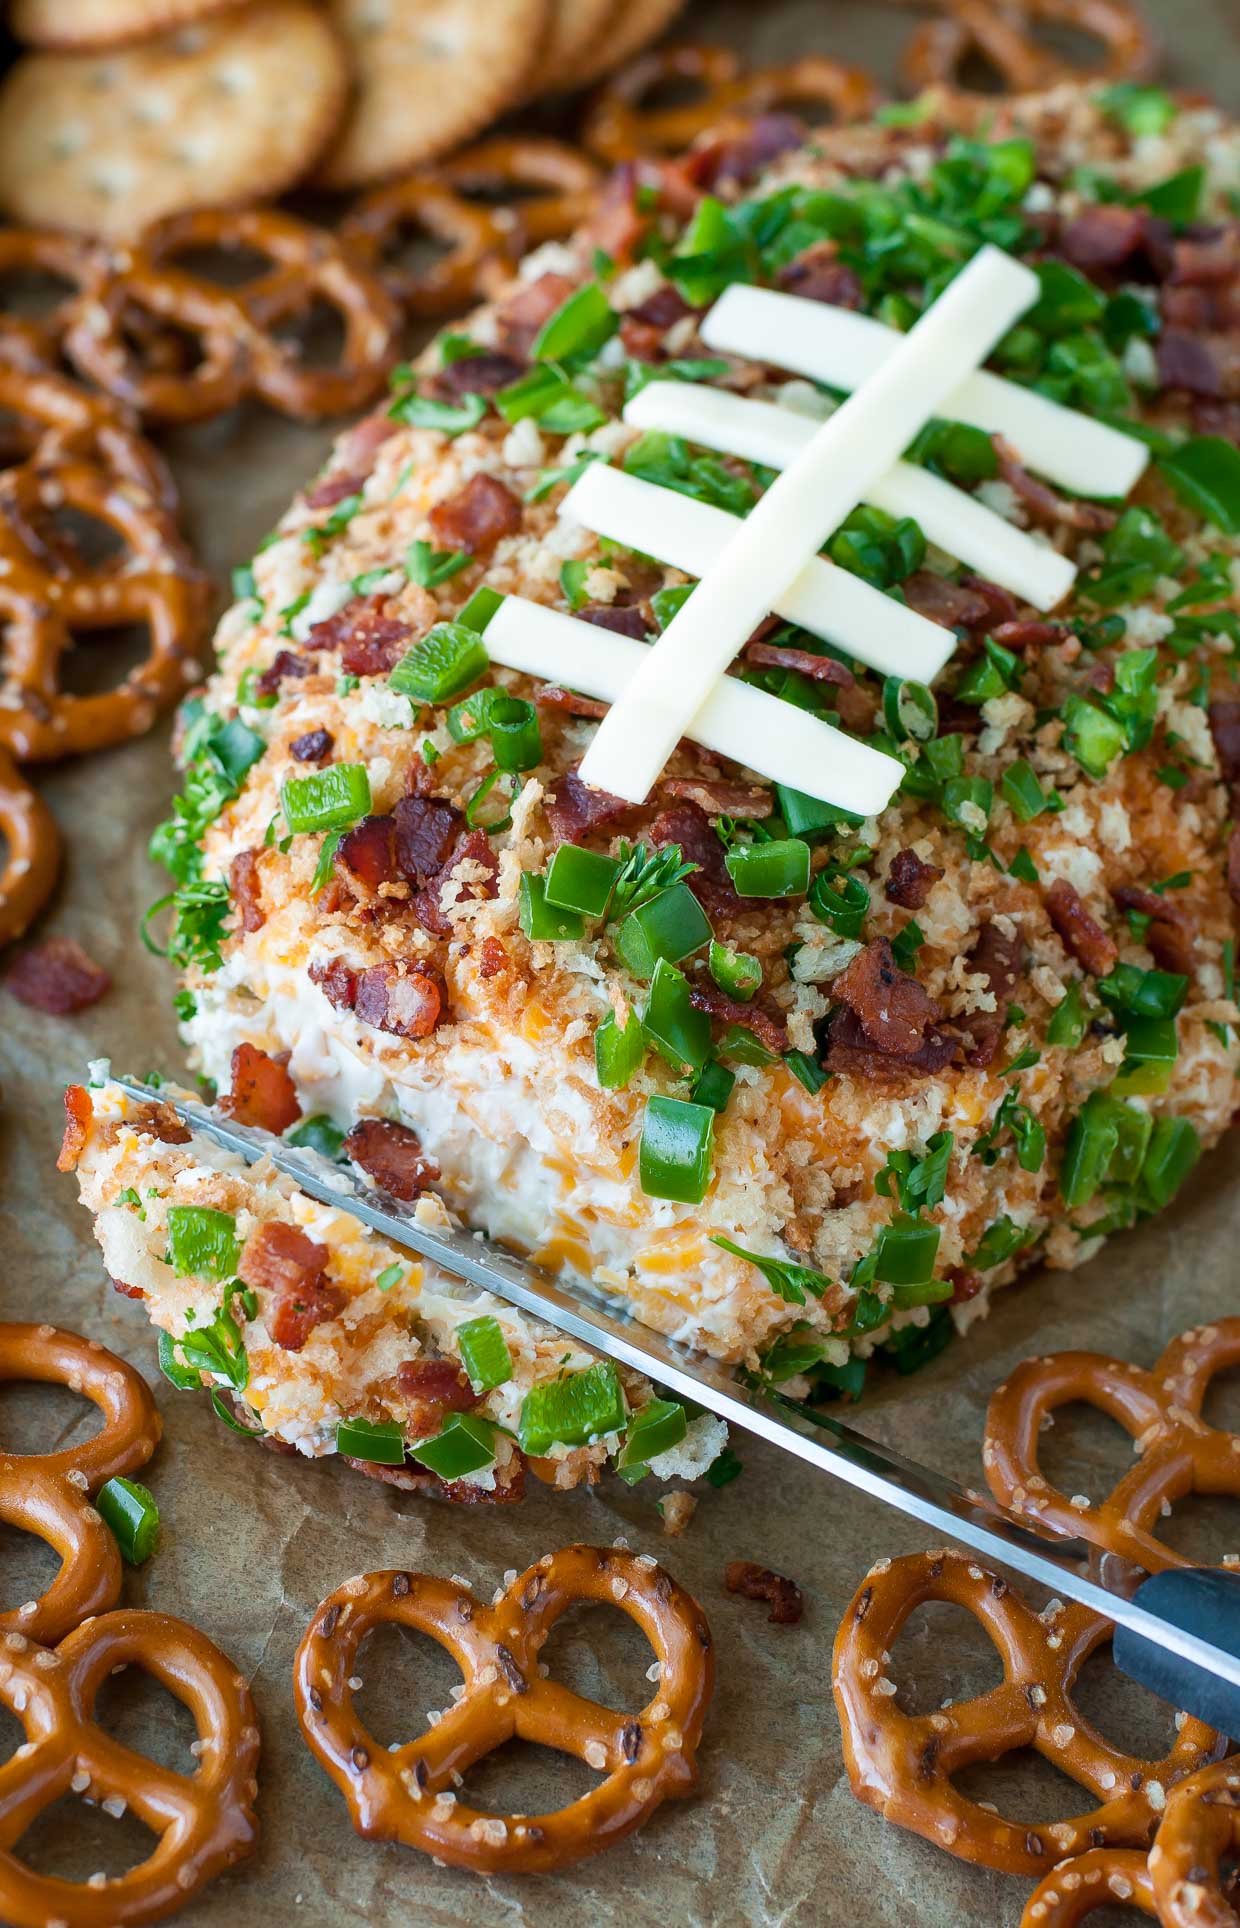 Peas and Crayons JALAPEÑO POPPER FOOTBALL CHEESE BALL